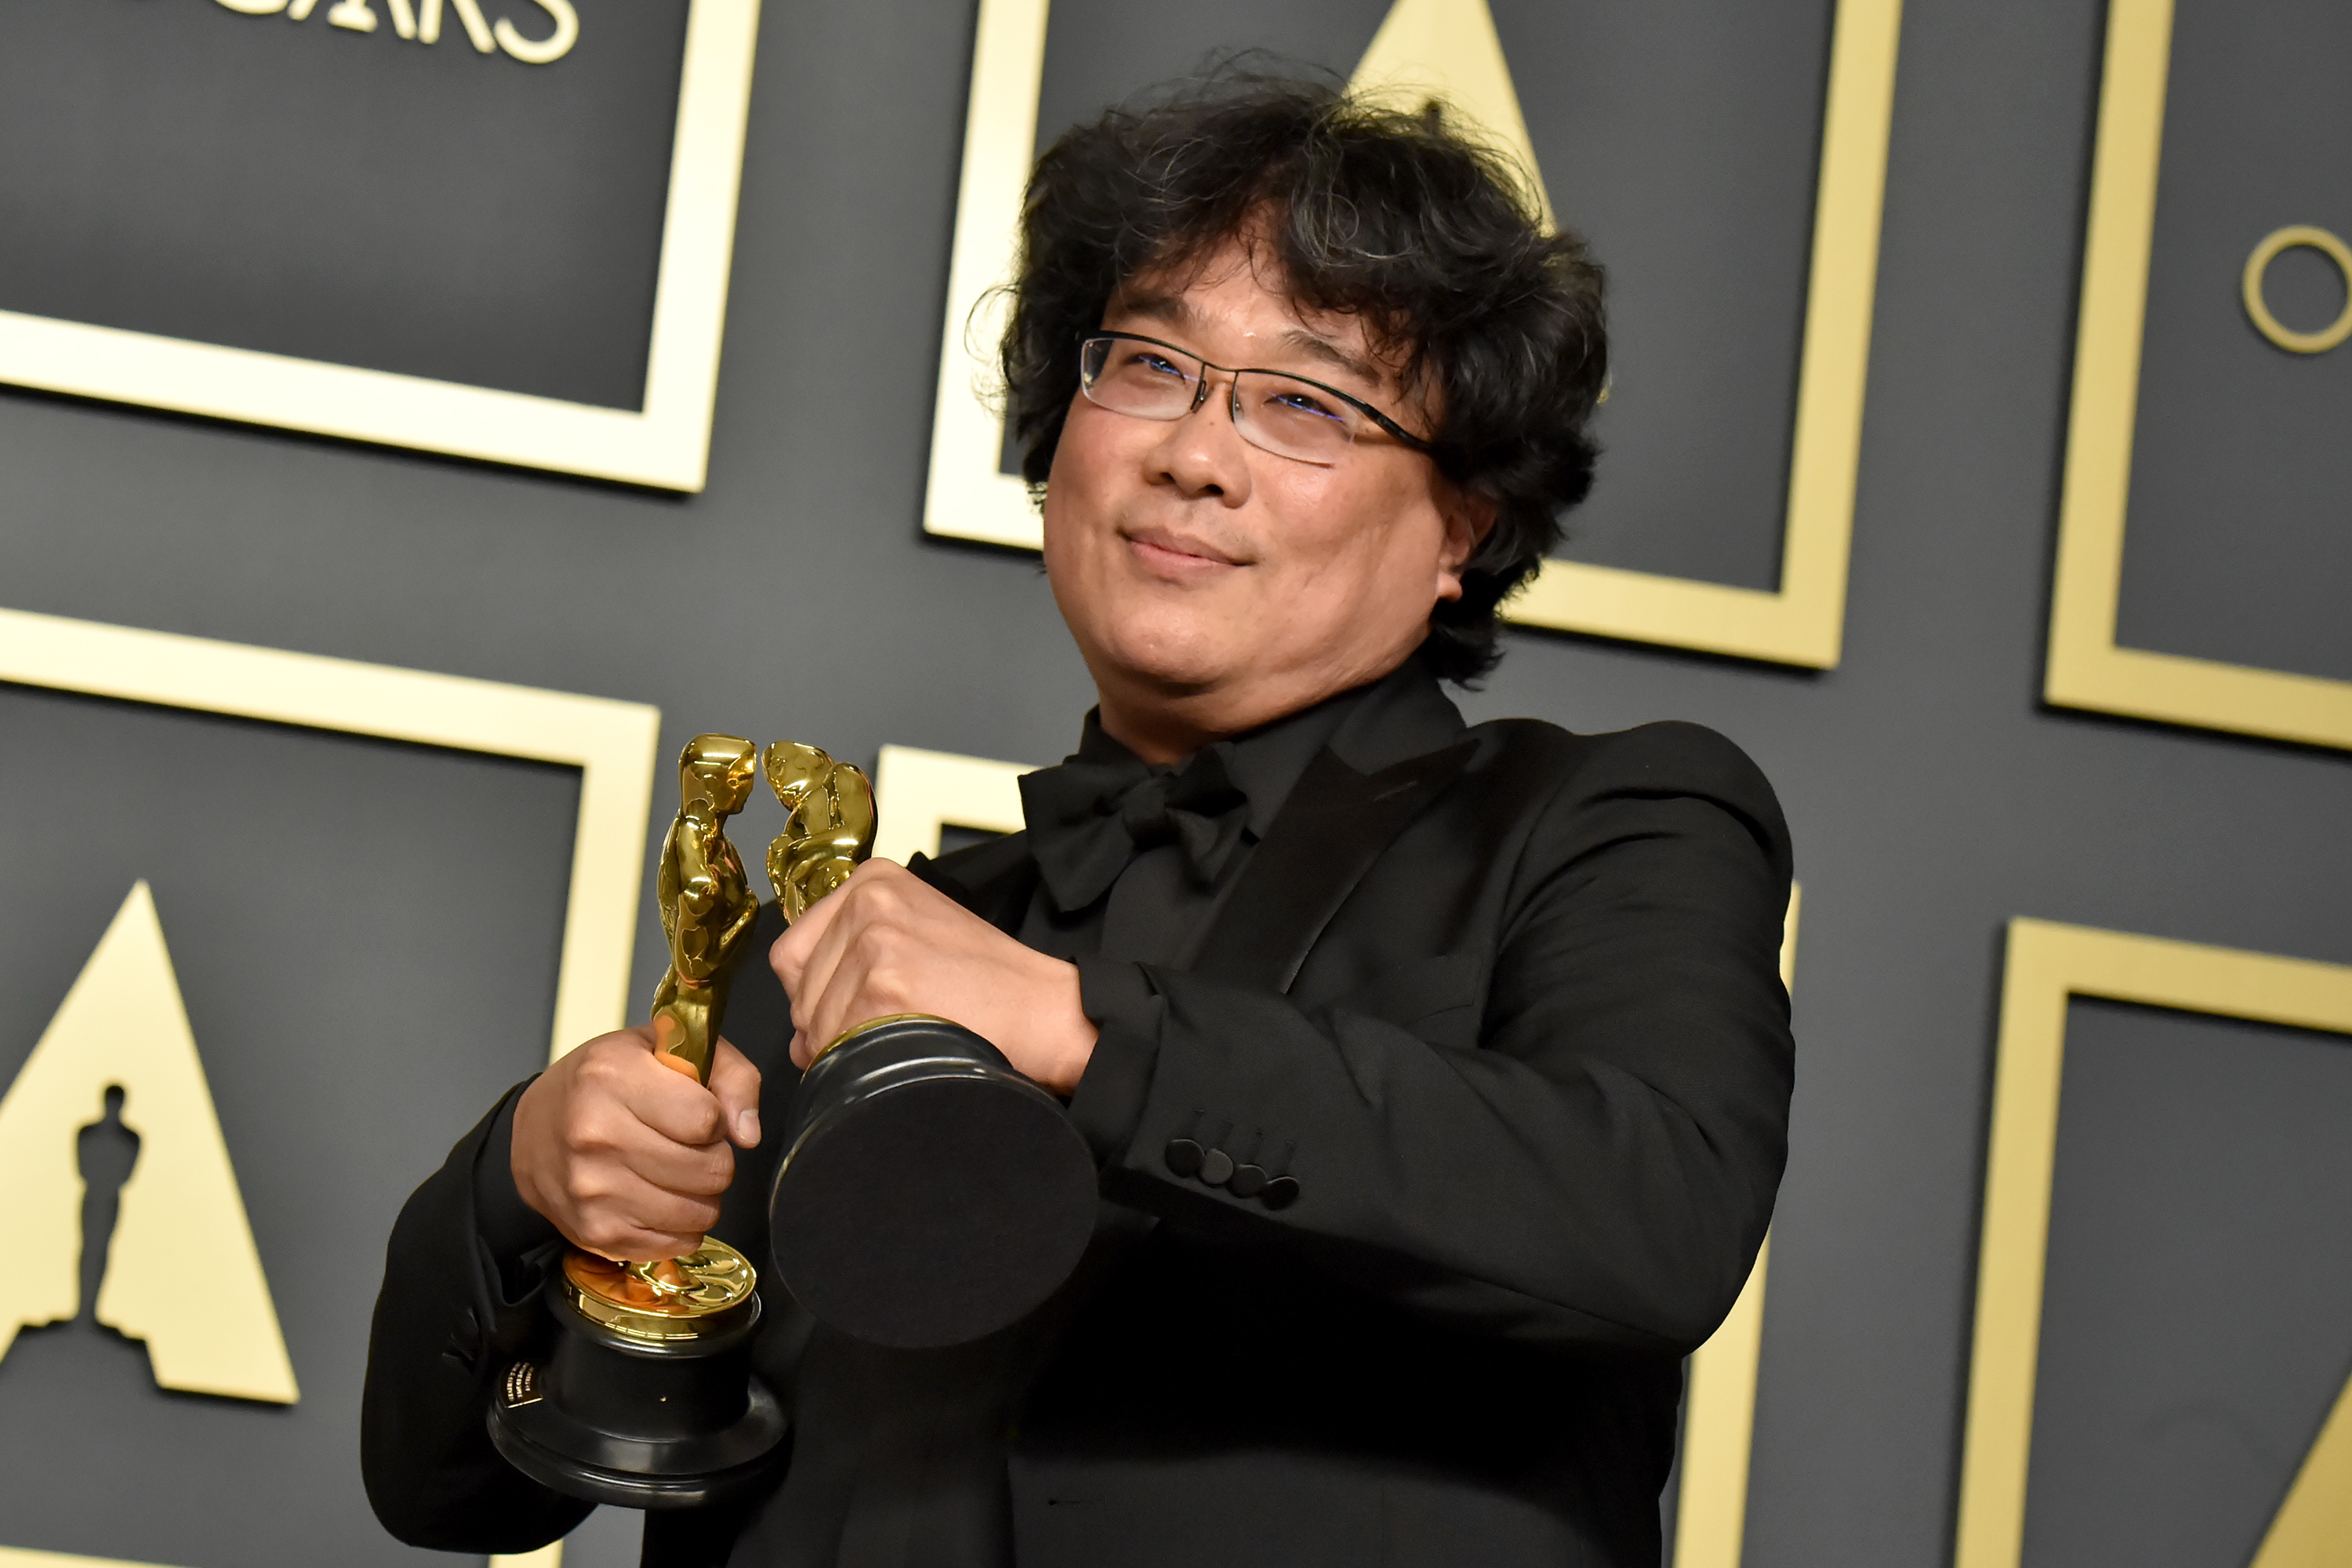 Martin Scorsese Sent Bong Joon Ho A Delightfully Wholesome Letter After His Oscars Wins